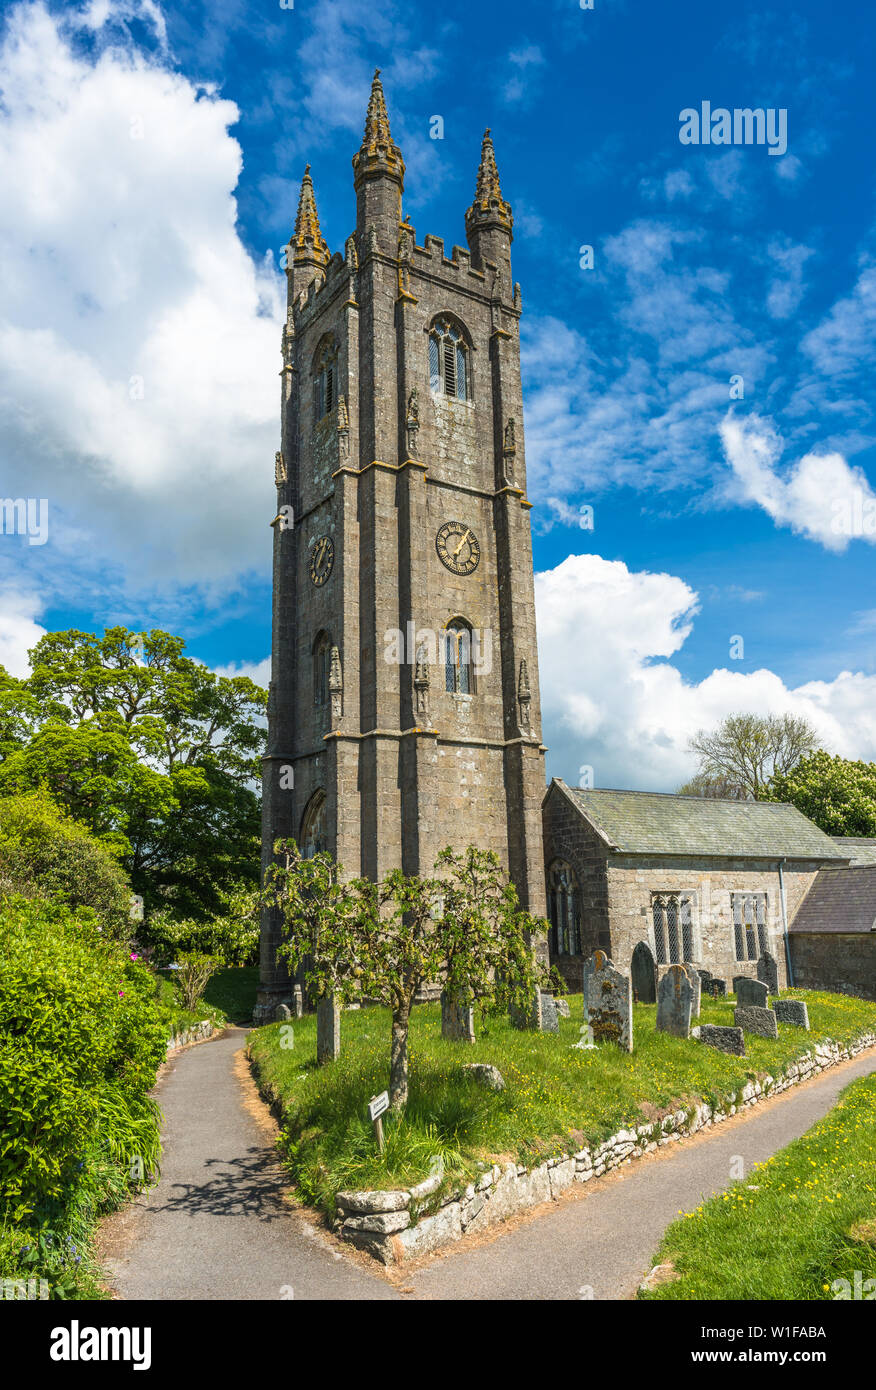 St Pancras Church at Widecome in the Moor village in Dartmoor National park, Devon, England, UK. Stock Photo